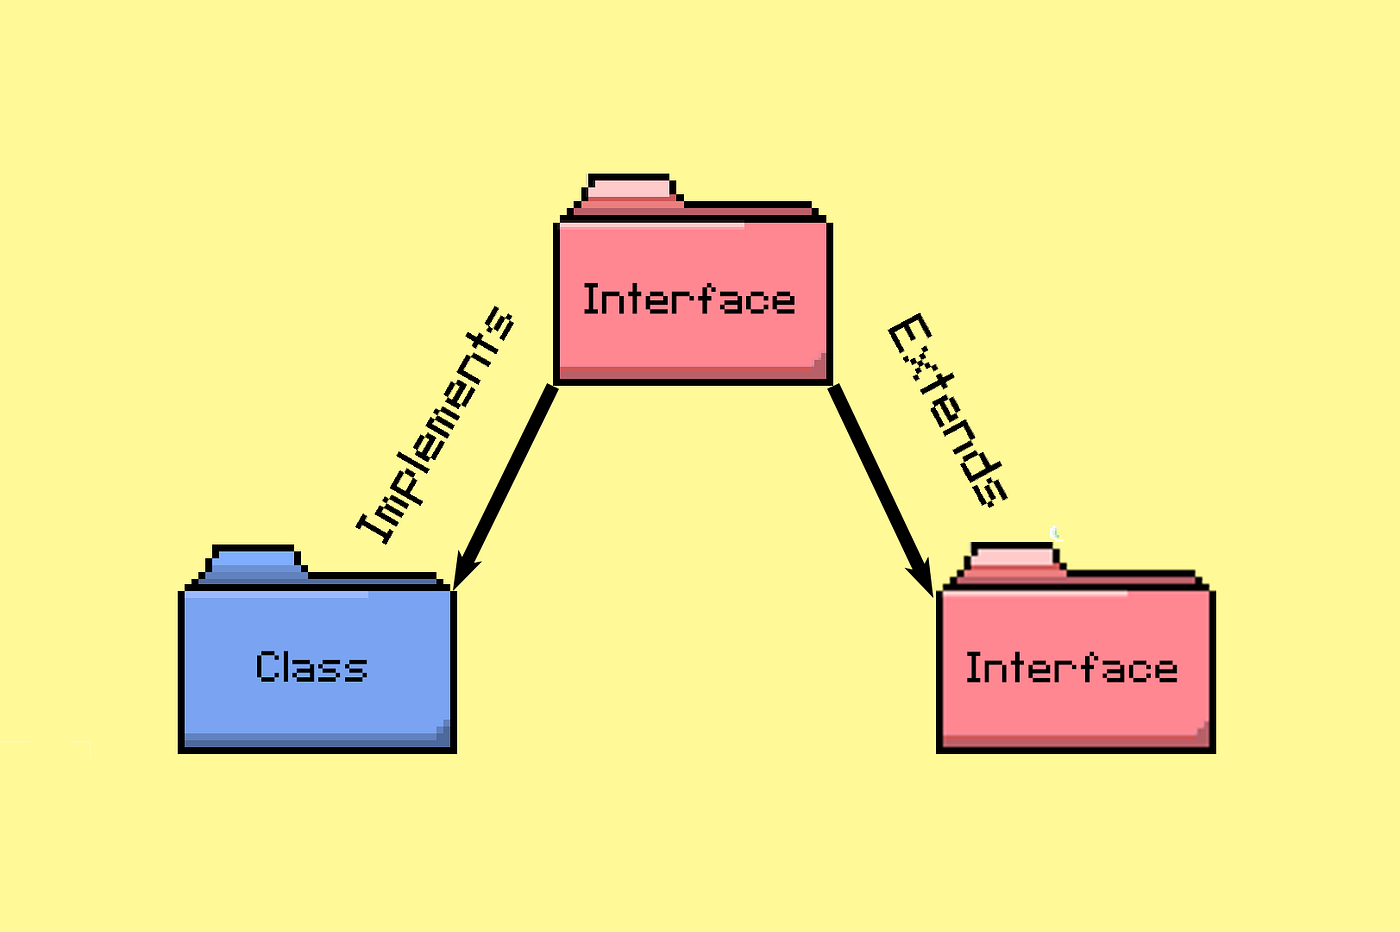 Implementing an Interface and extends class